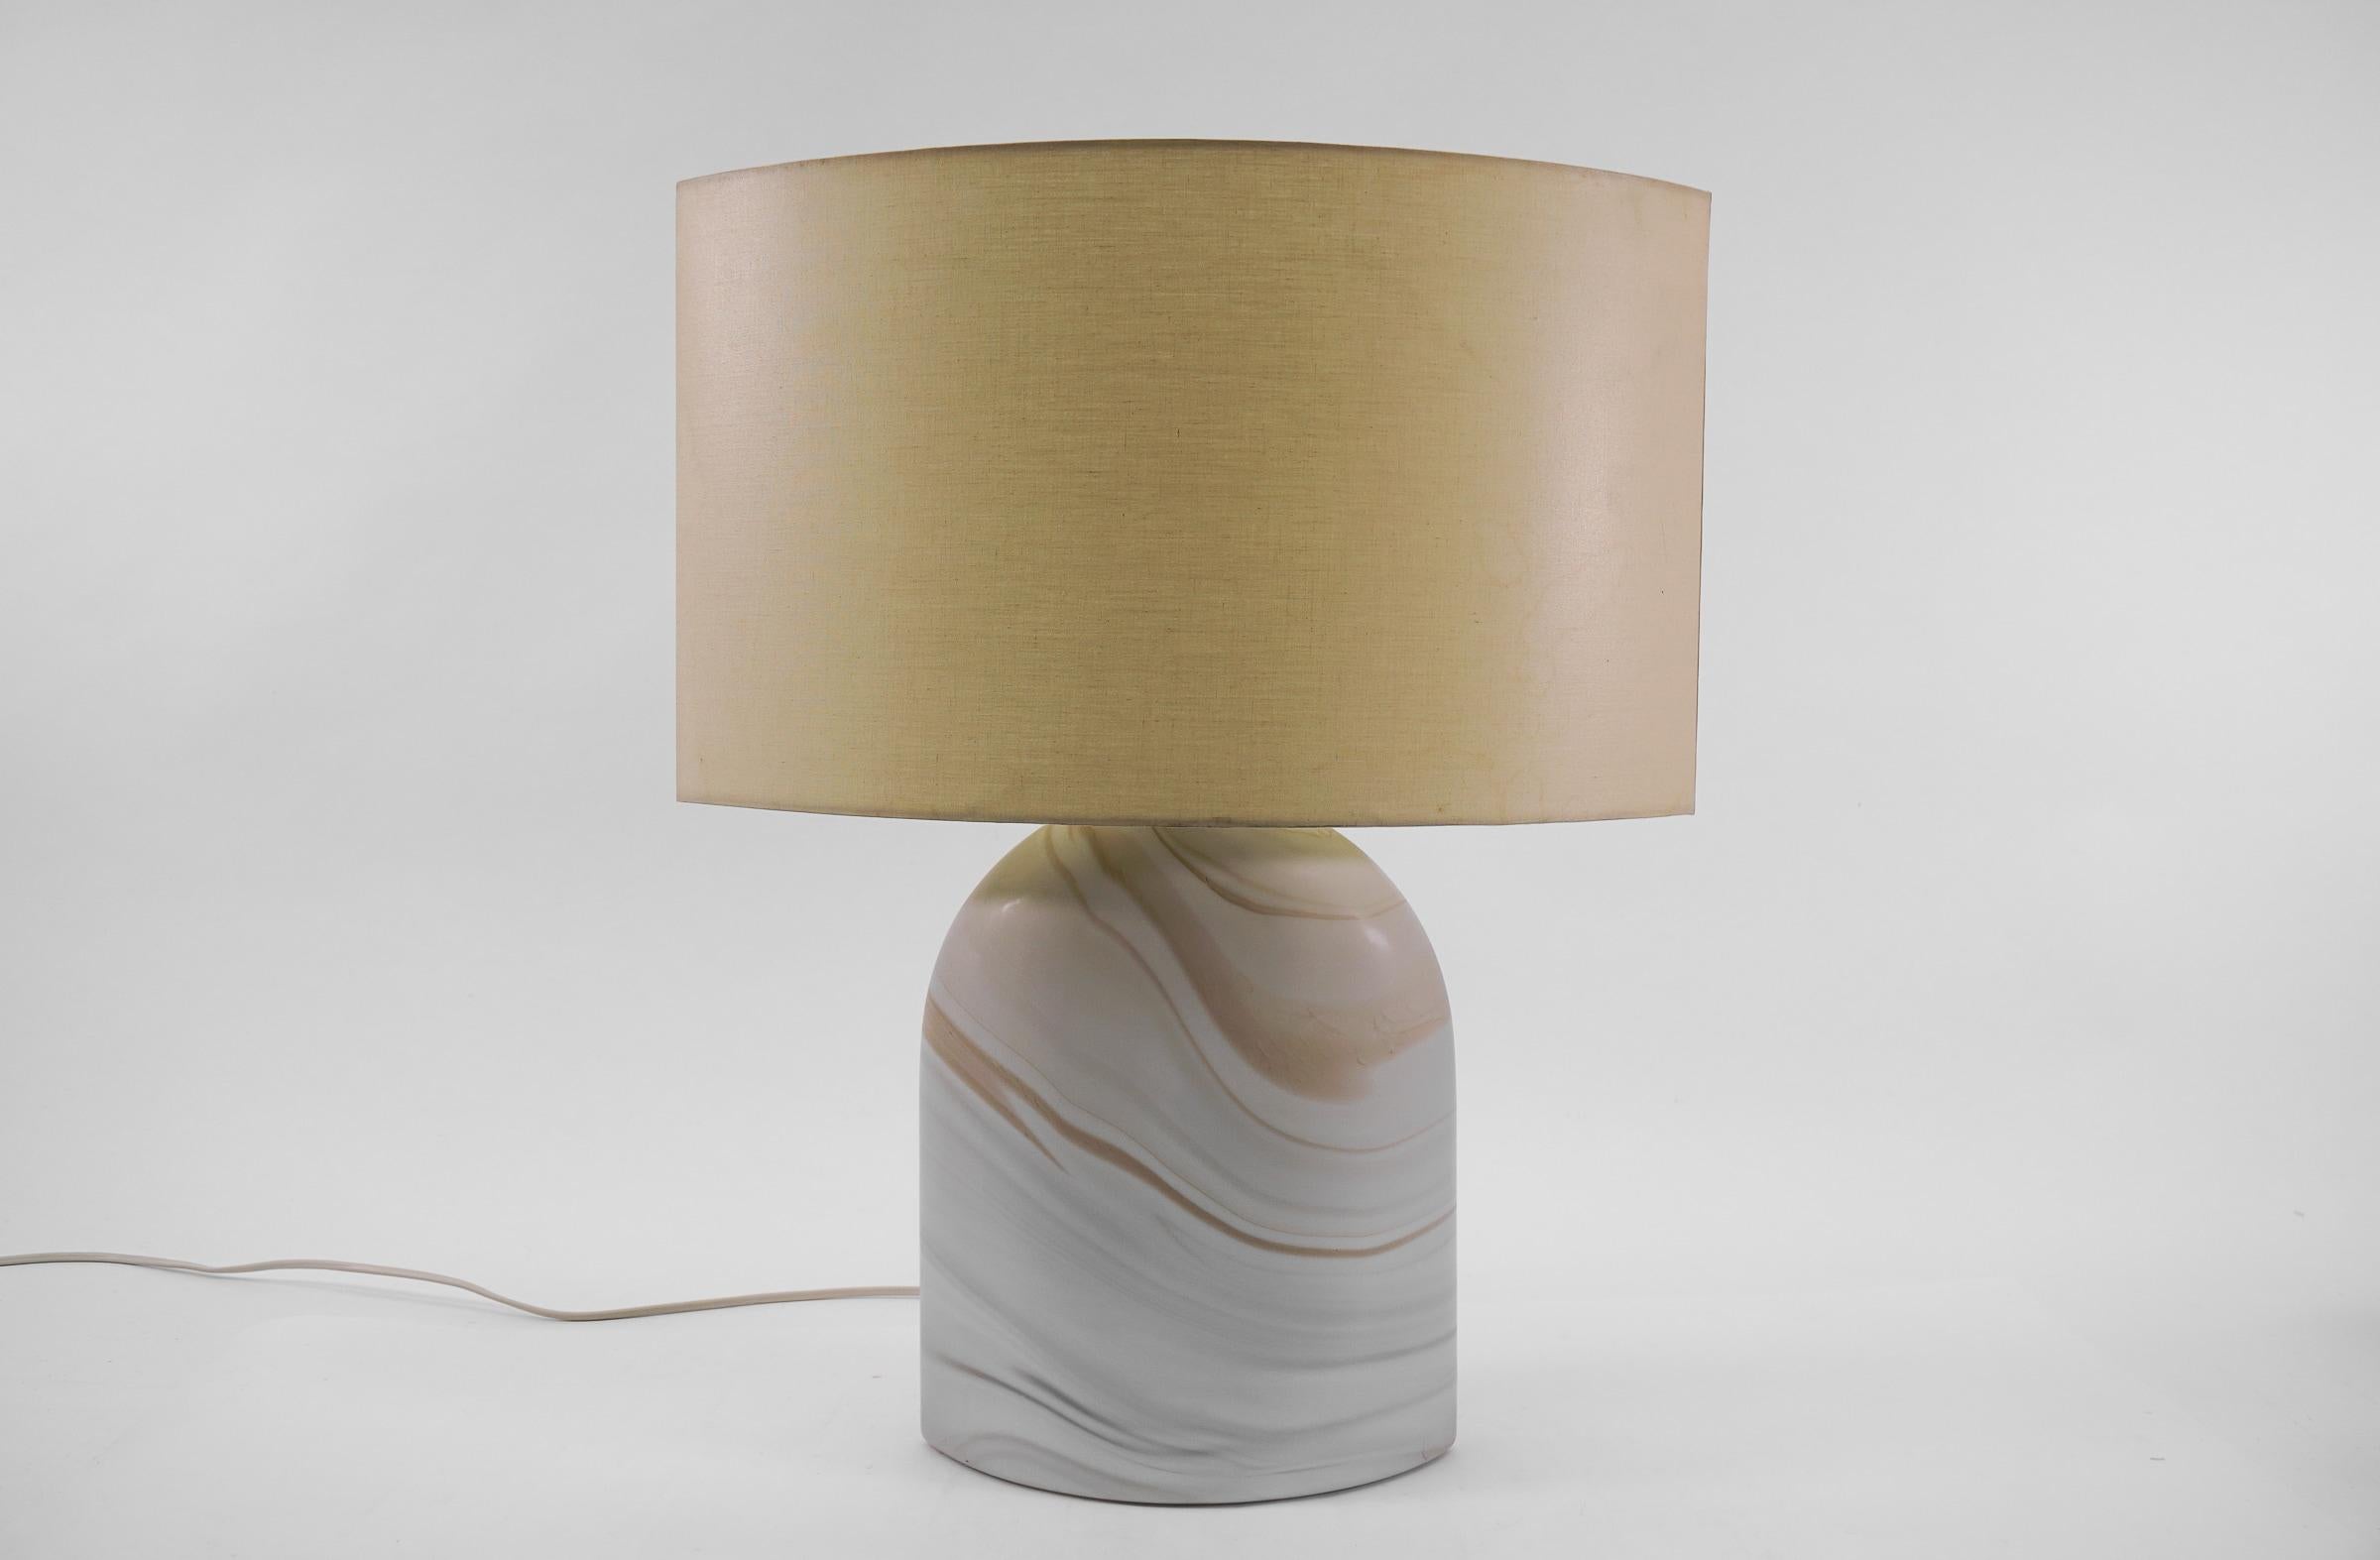 Lovely Mid-Century Modern Table Lamp by Peill & Putzler for Carrara Arte, 1960s Germany.

The lamp needs 1 x E27 Edison screw fit bulb and 1 x E14 inside the glass, is with original wiring, and in working condition. It runs both on 110 / 230